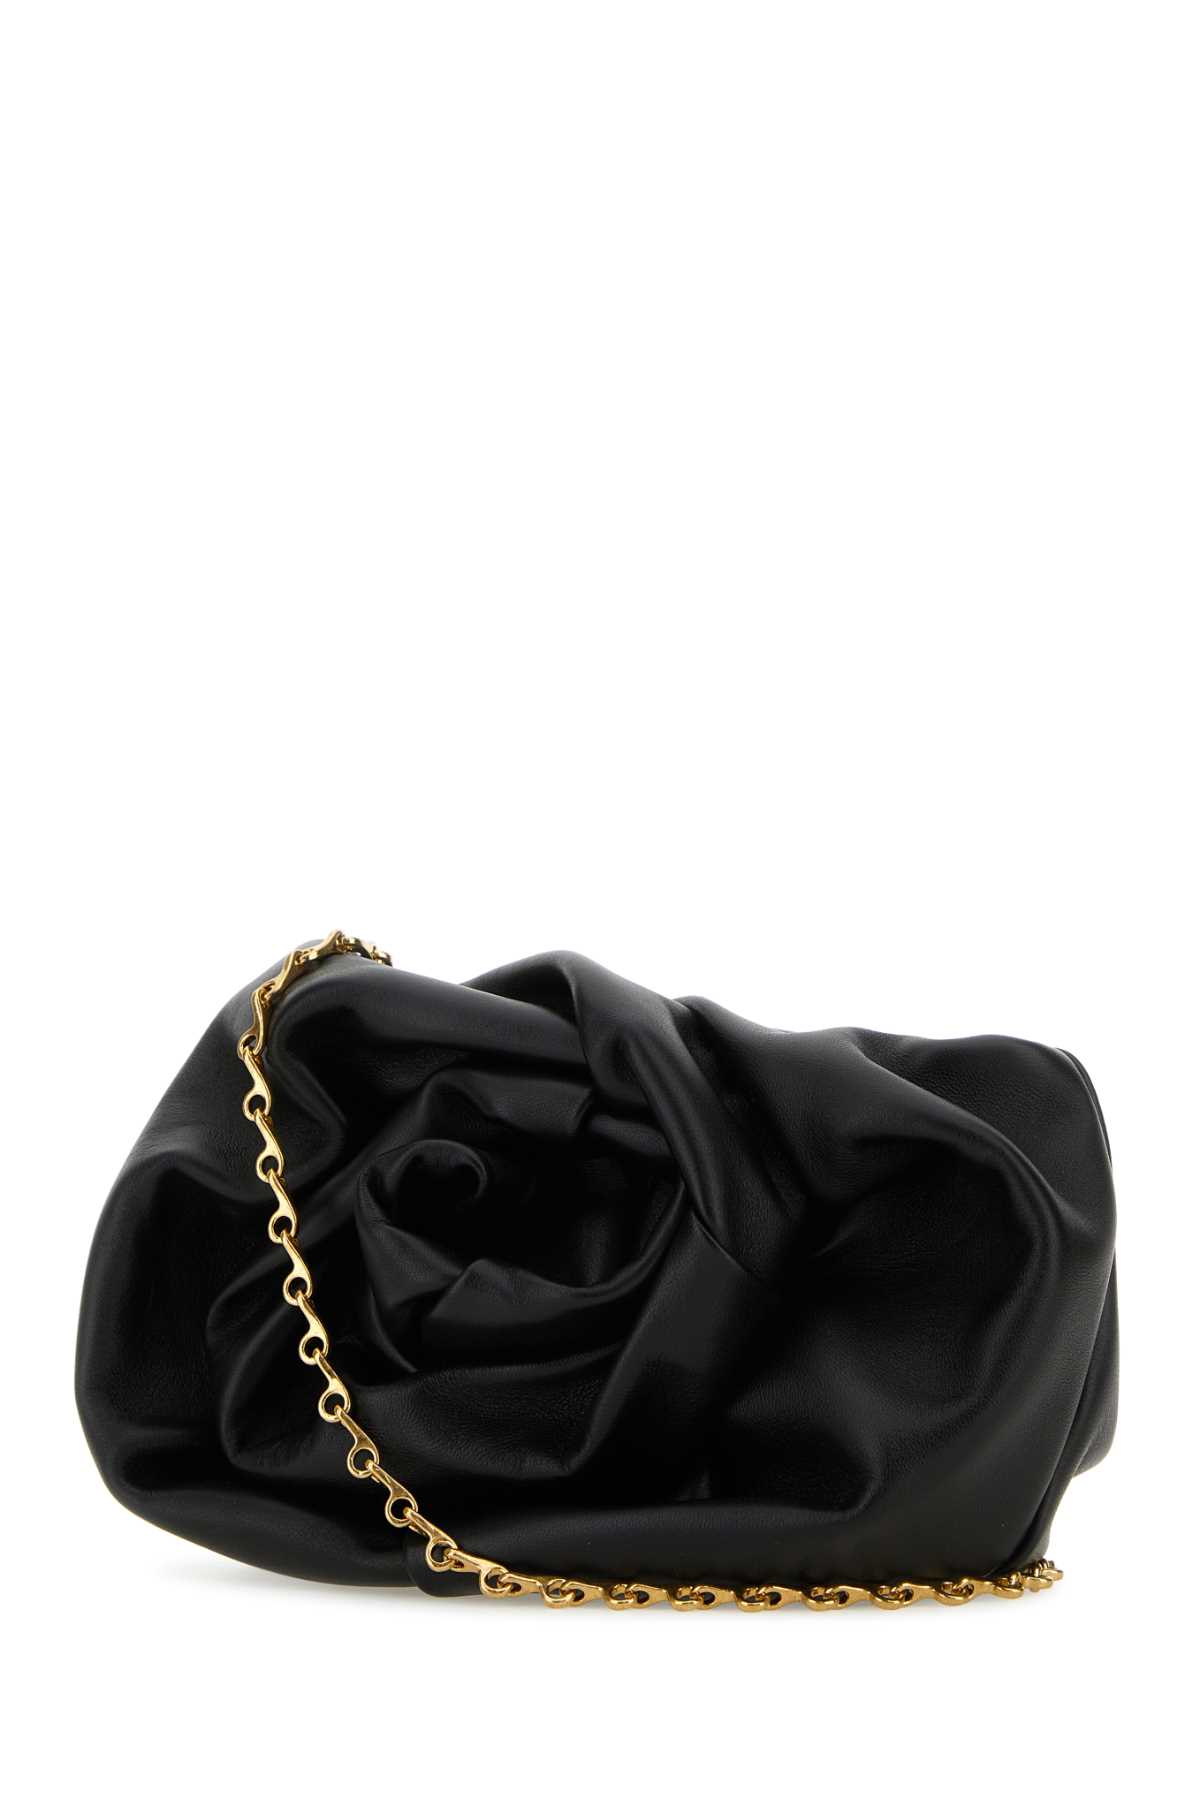 Burberry Black Nappa Leather Rose Clutch